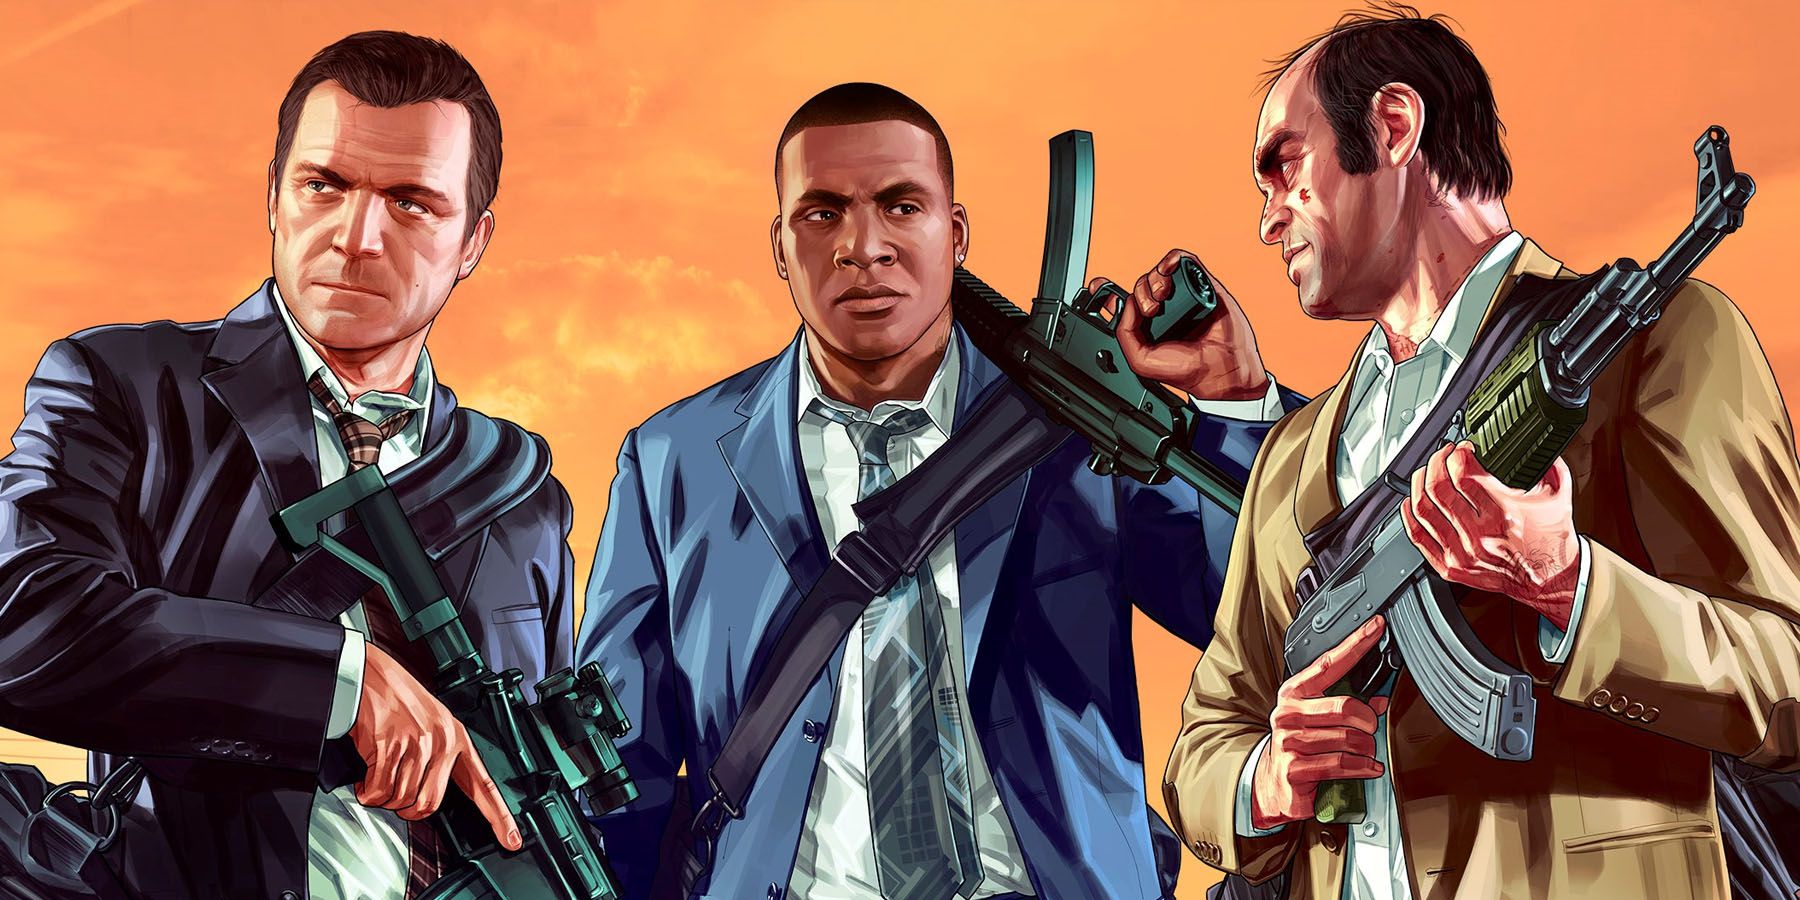 An image of Grand Theft Auto Characters Michael, Frankin, and Trevor holding guns at sunset.